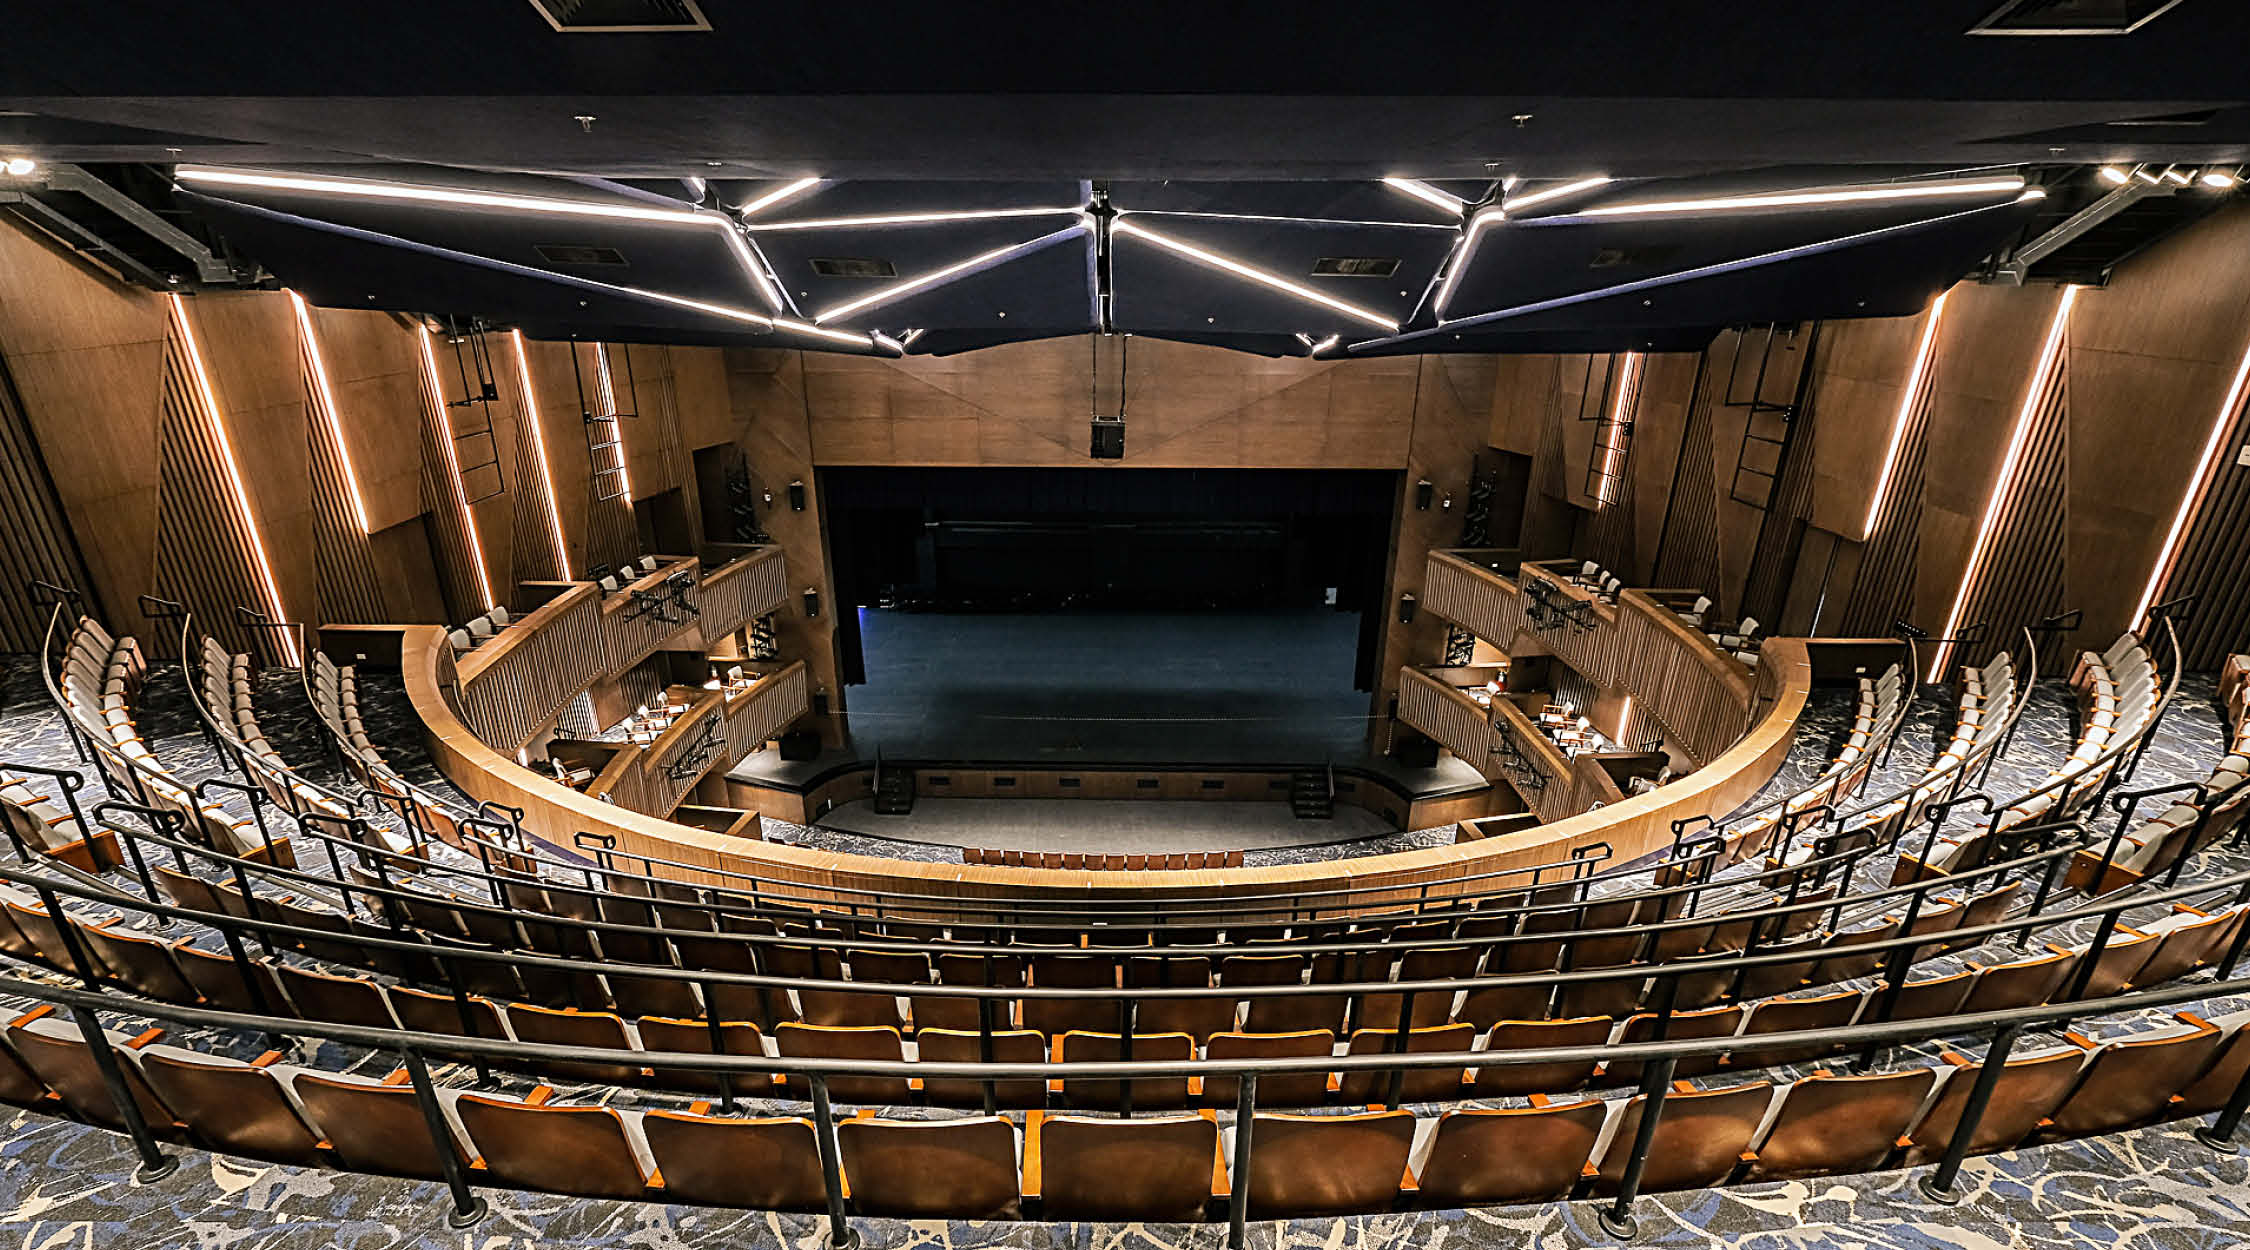 Samsung Performing Arts Theater: A World-Class Stage - BluPrint